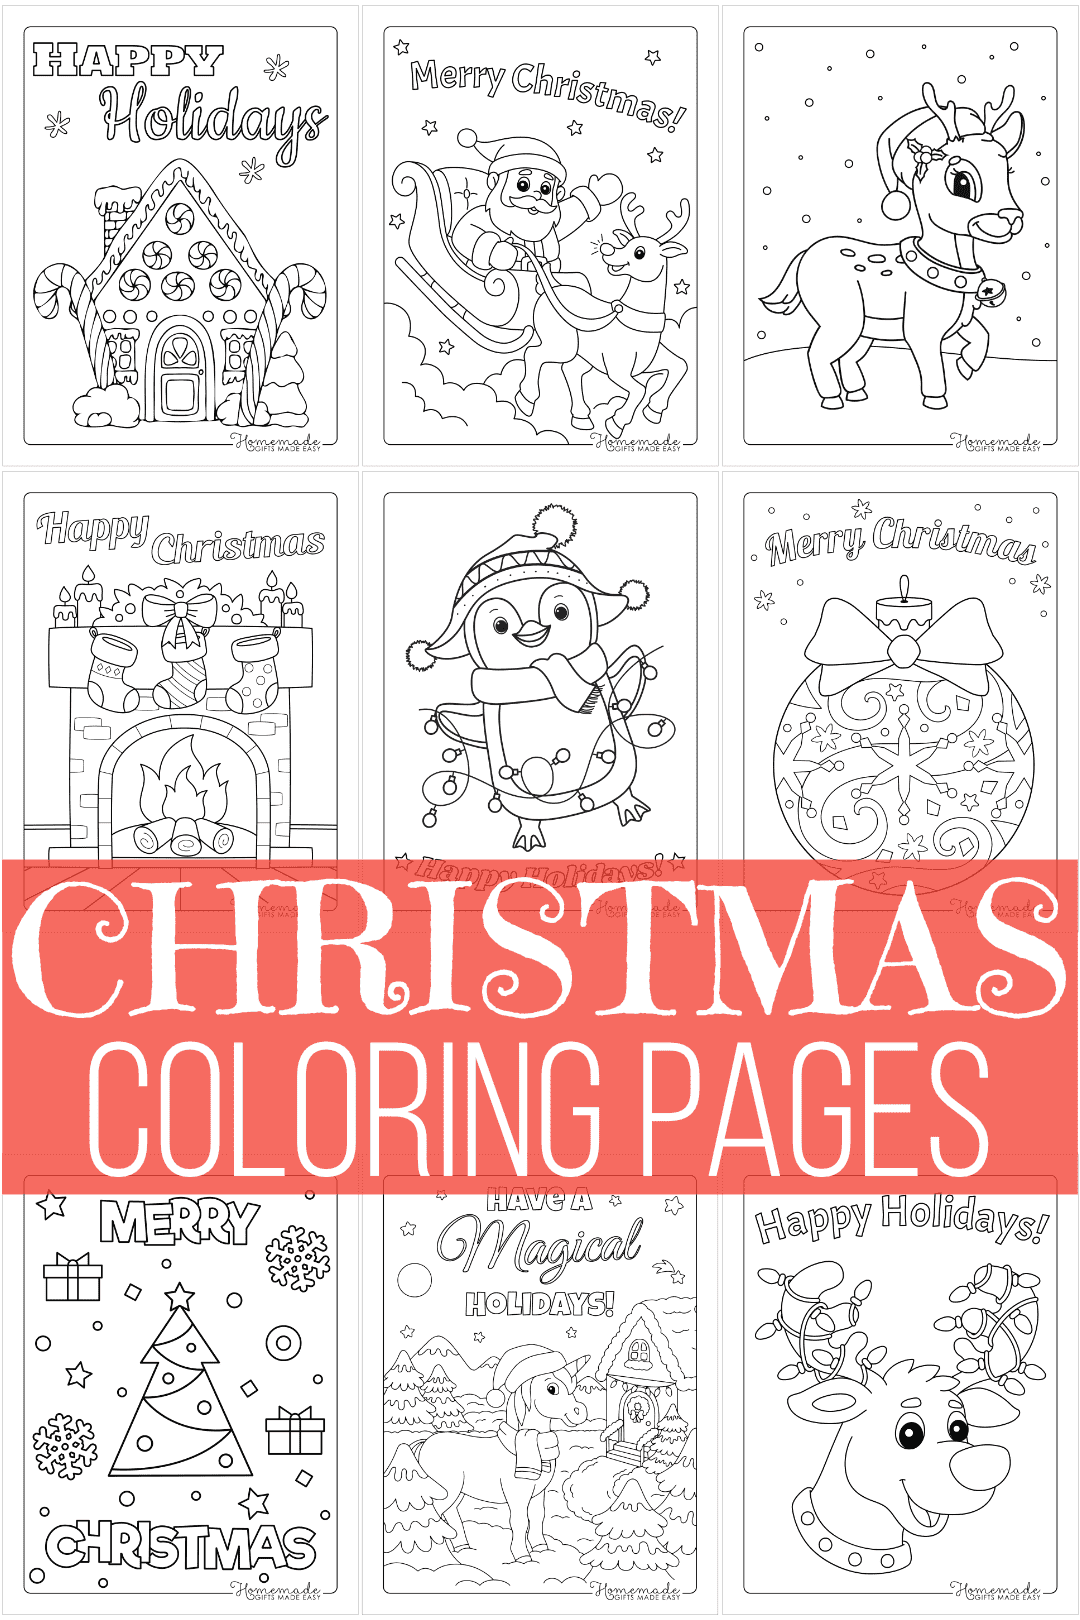 20 Free Christmas Coloring Pages for Kids & Adults